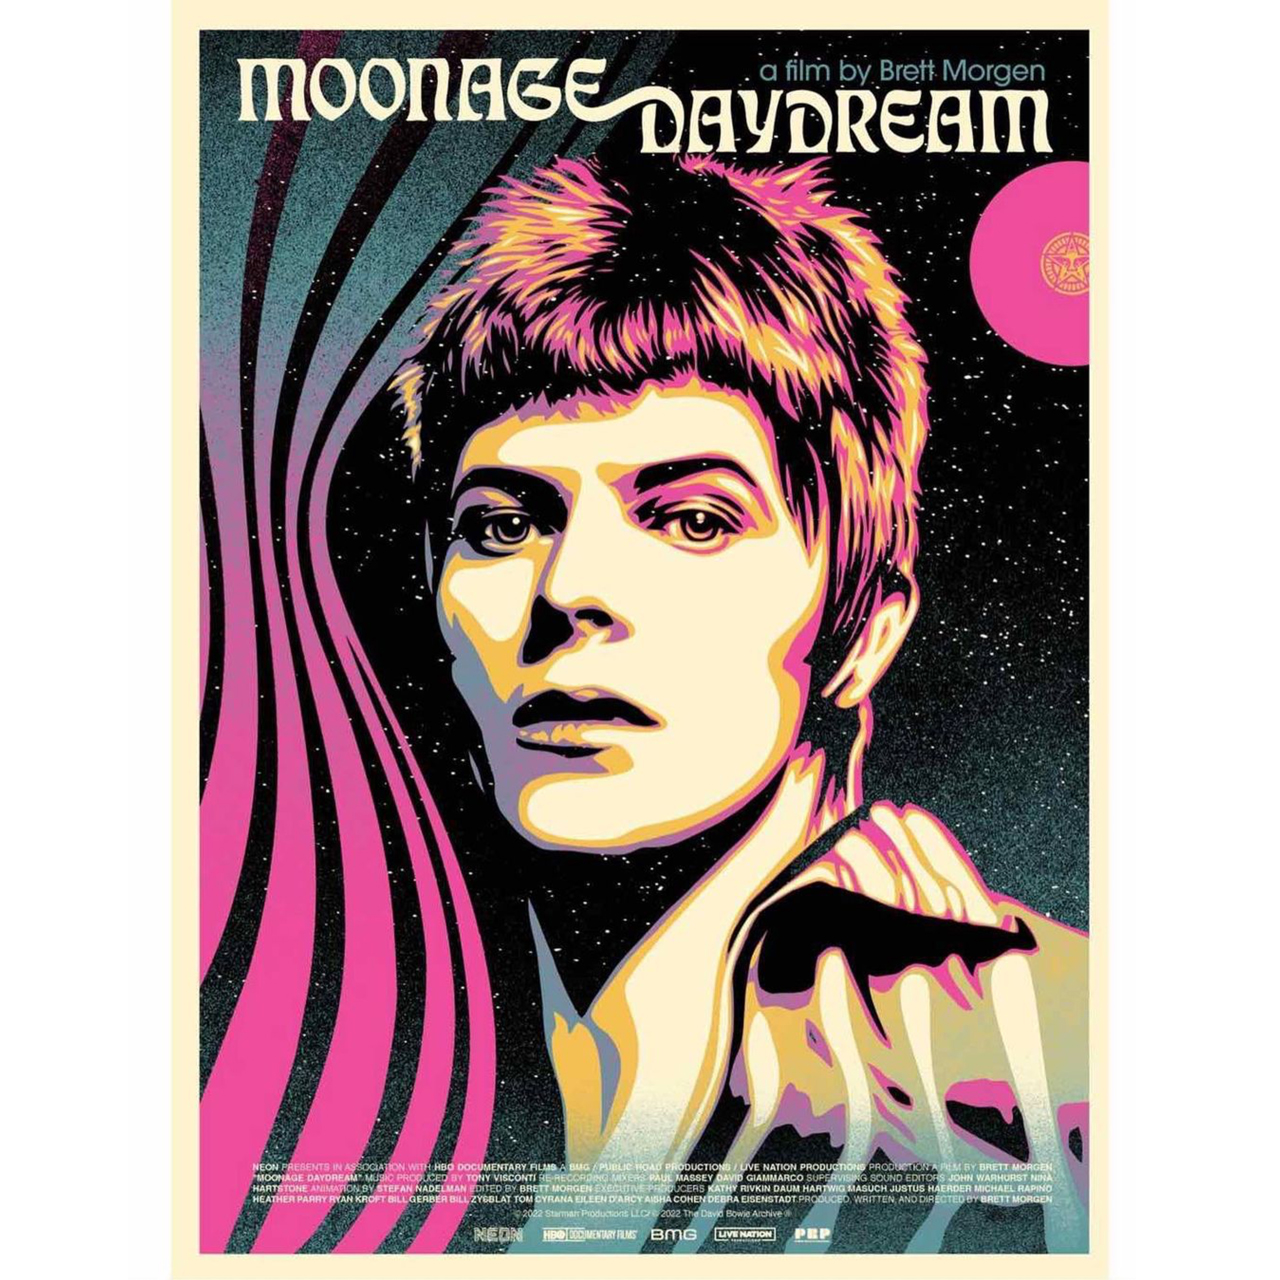 Moonage Daydream 3-Day Print Release on mondoshop.com 11/15 - 11/18 @ 10 AM  PDT / 12 PM CST - Obey Giant